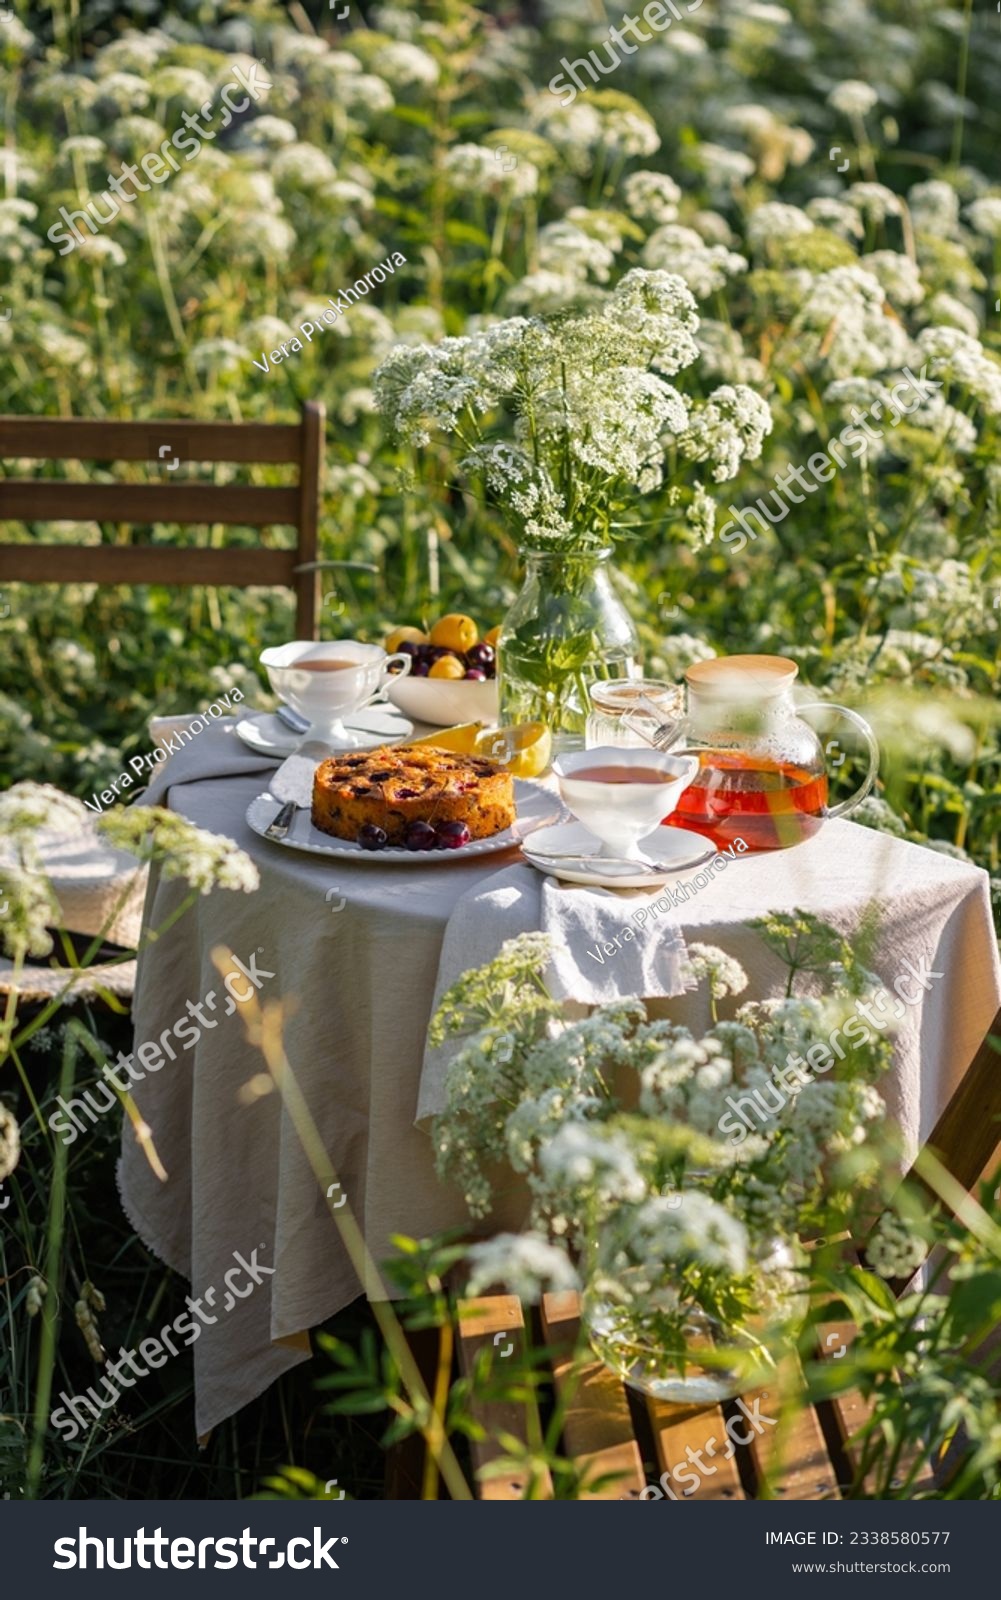 Cozy tea party in the garden with white porcelain cups, teapot, candle, flowers, homemade sweet cherry pie. Wooden furniture, elegant table decor. Romantic atmosphere, candles, linen tablecloth #2338580577